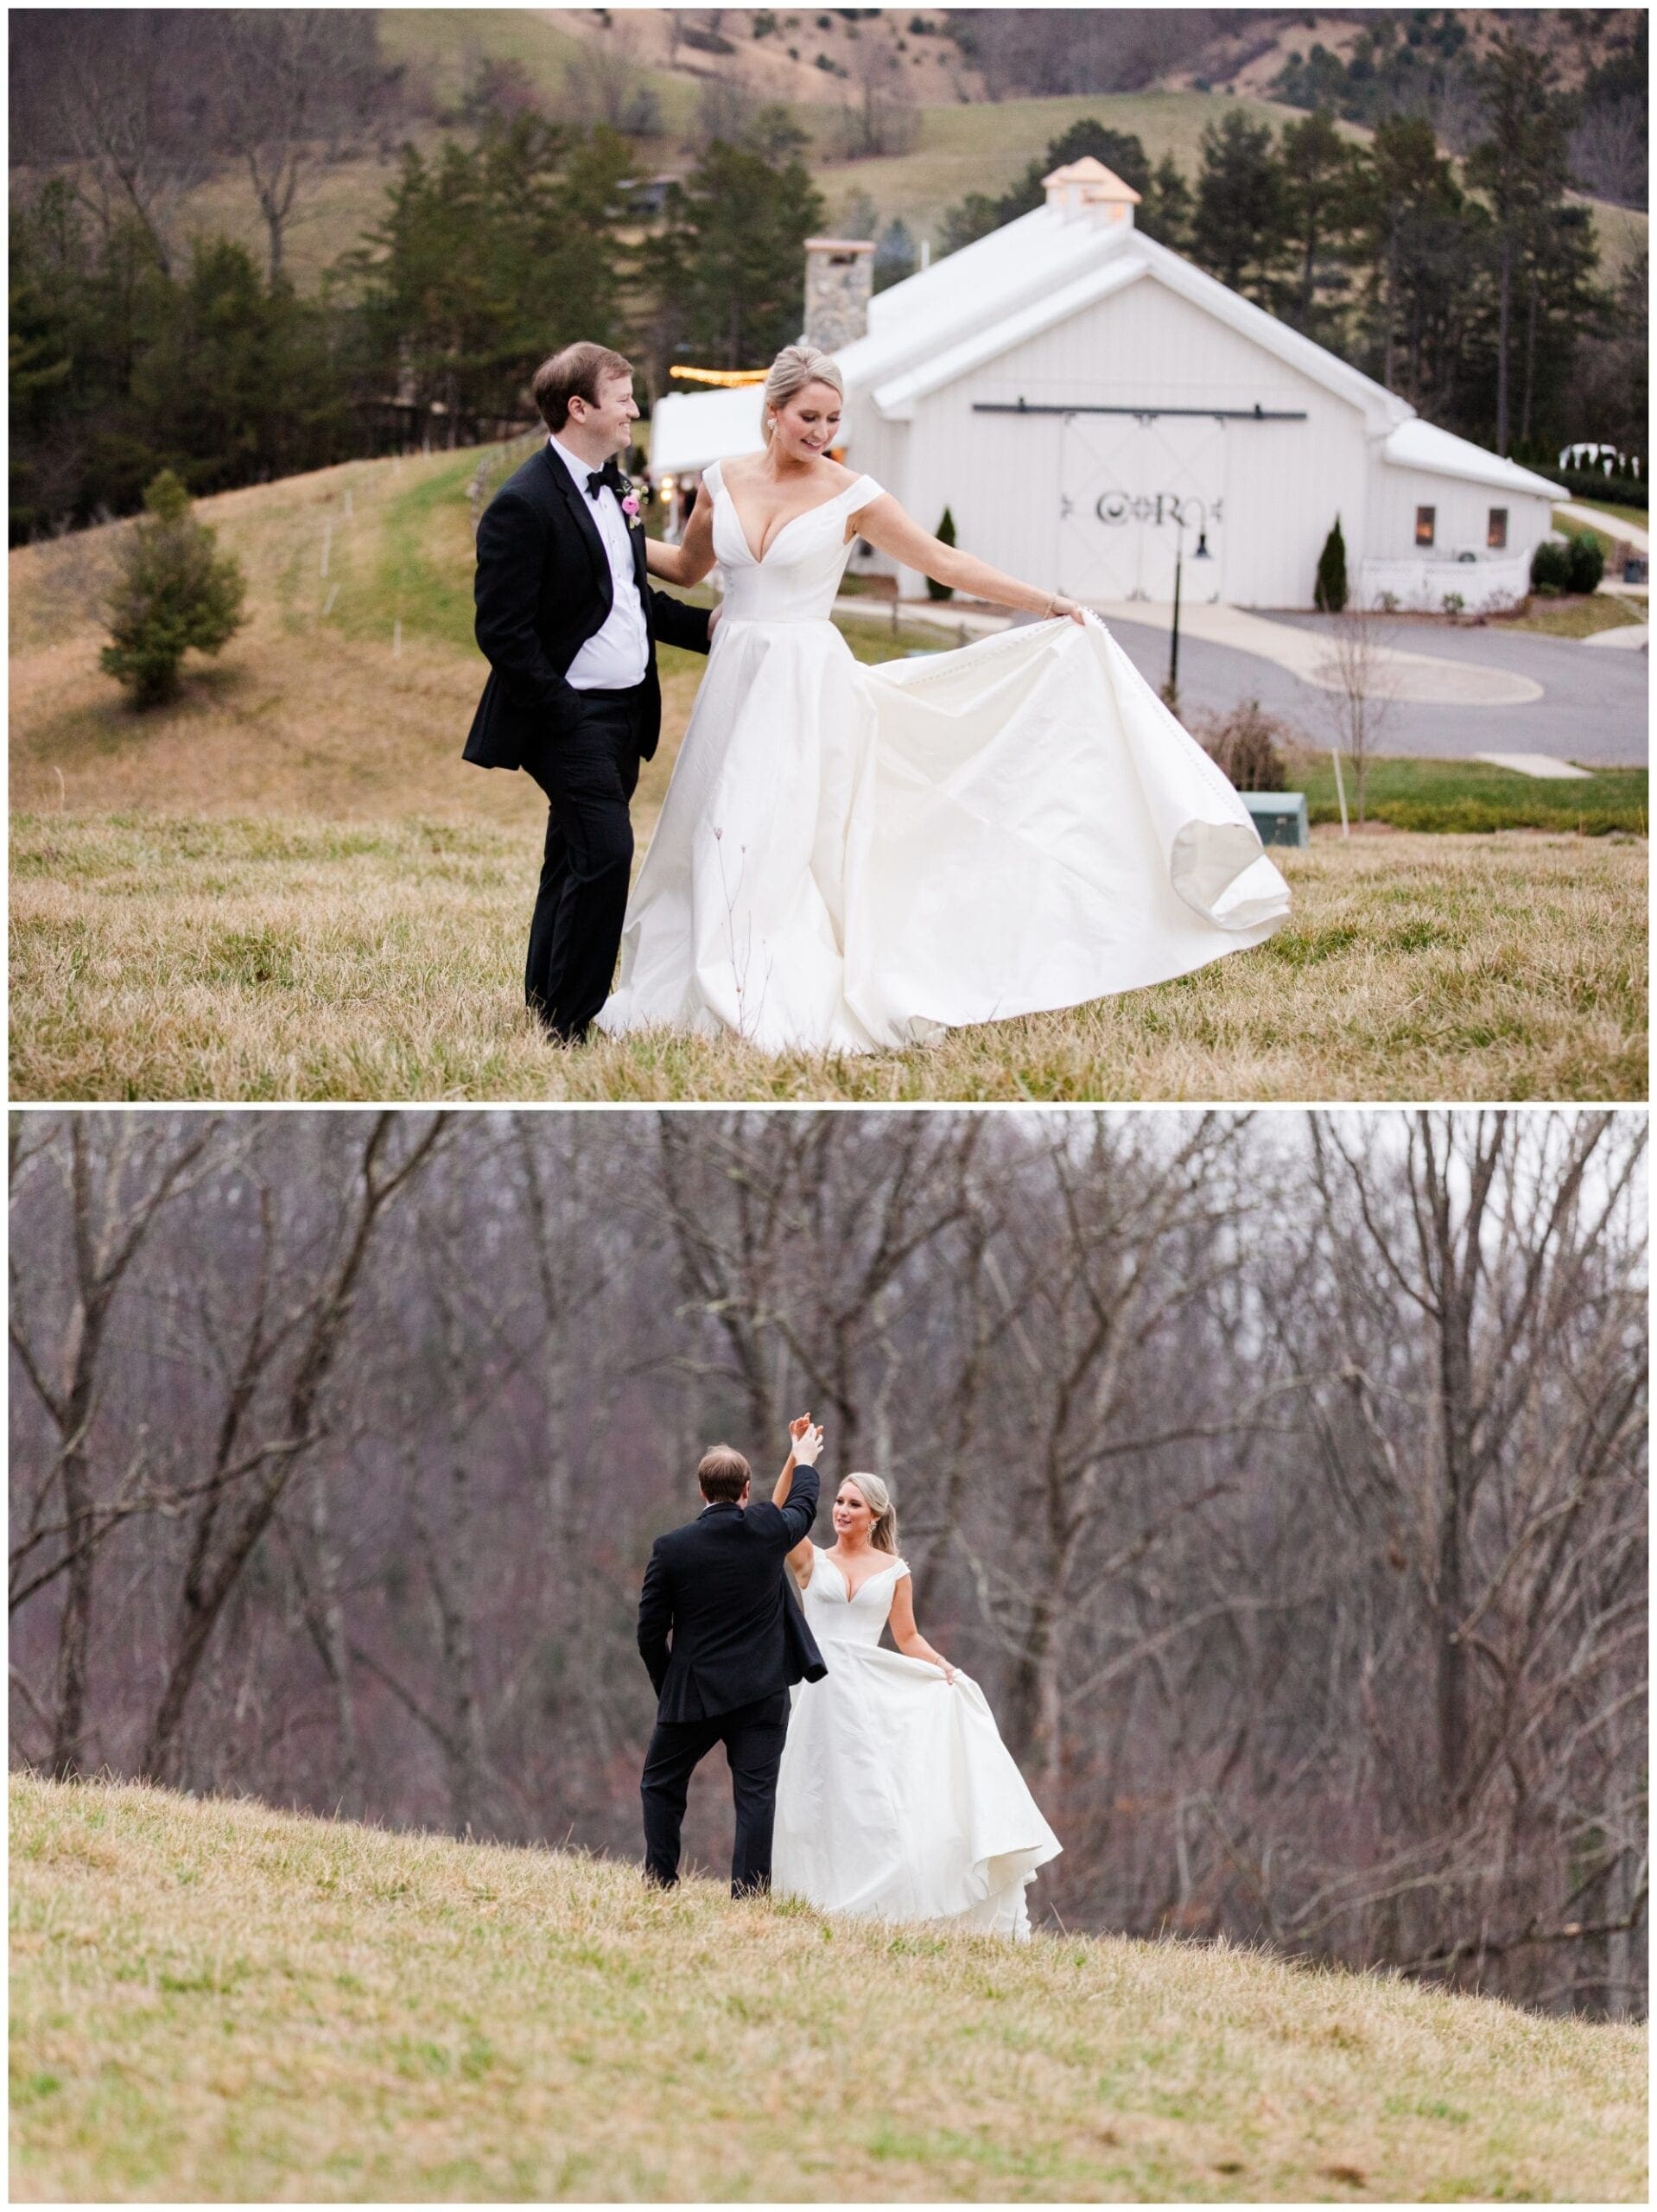 Couple dancing in field above their wedding venue